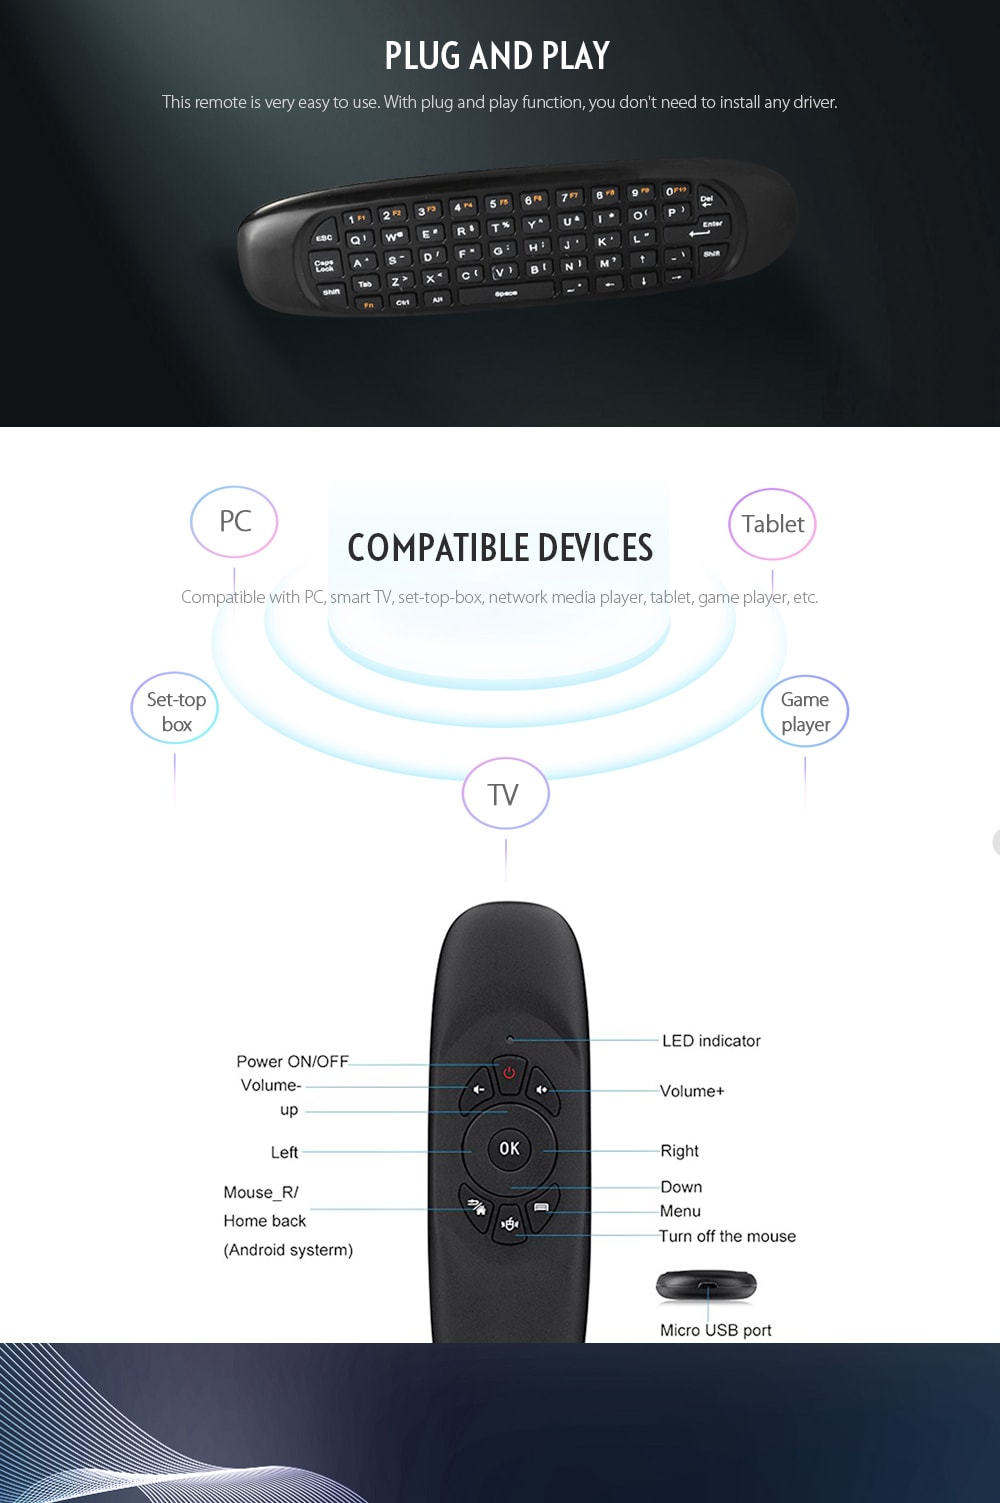 TK668 2.4GHz Wireless Air Mouse + Remote Controller + QWERTY Keyboard with LED Indicator- Black